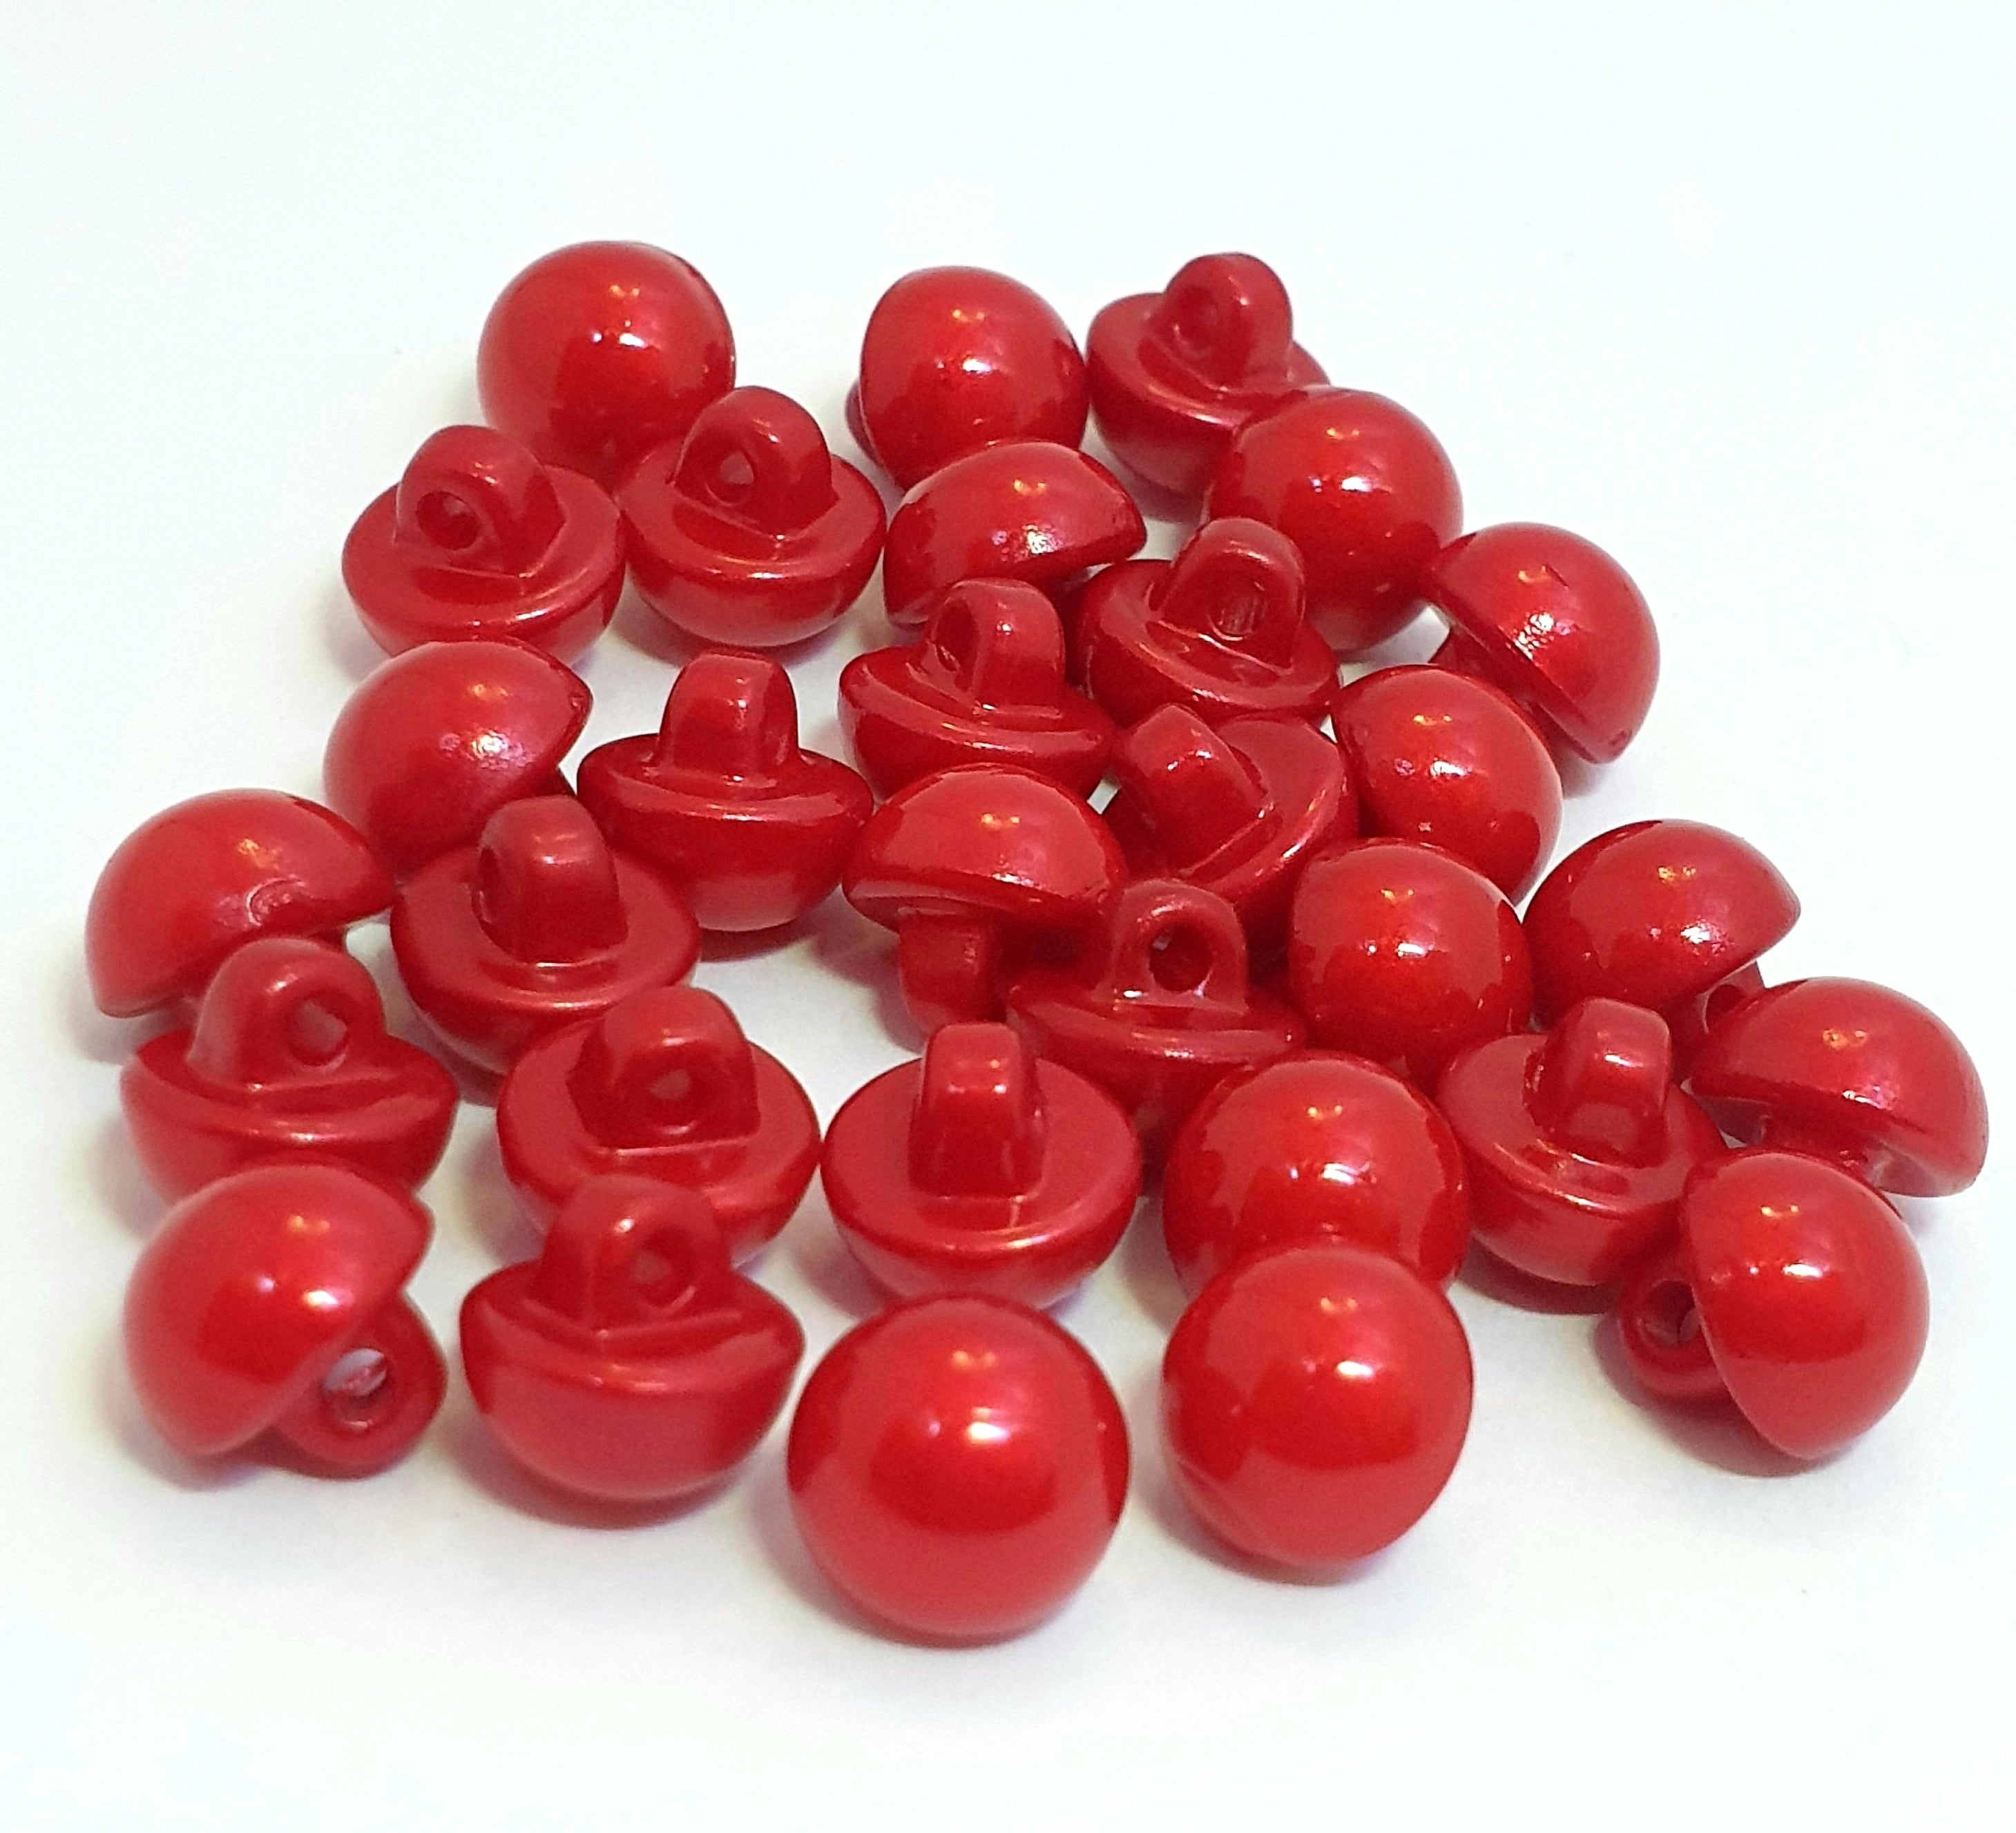 MajorCrafts 30pcs 8mm Red High-Grade Acrylic Small Round Sewing Mushroom Shank Buttons